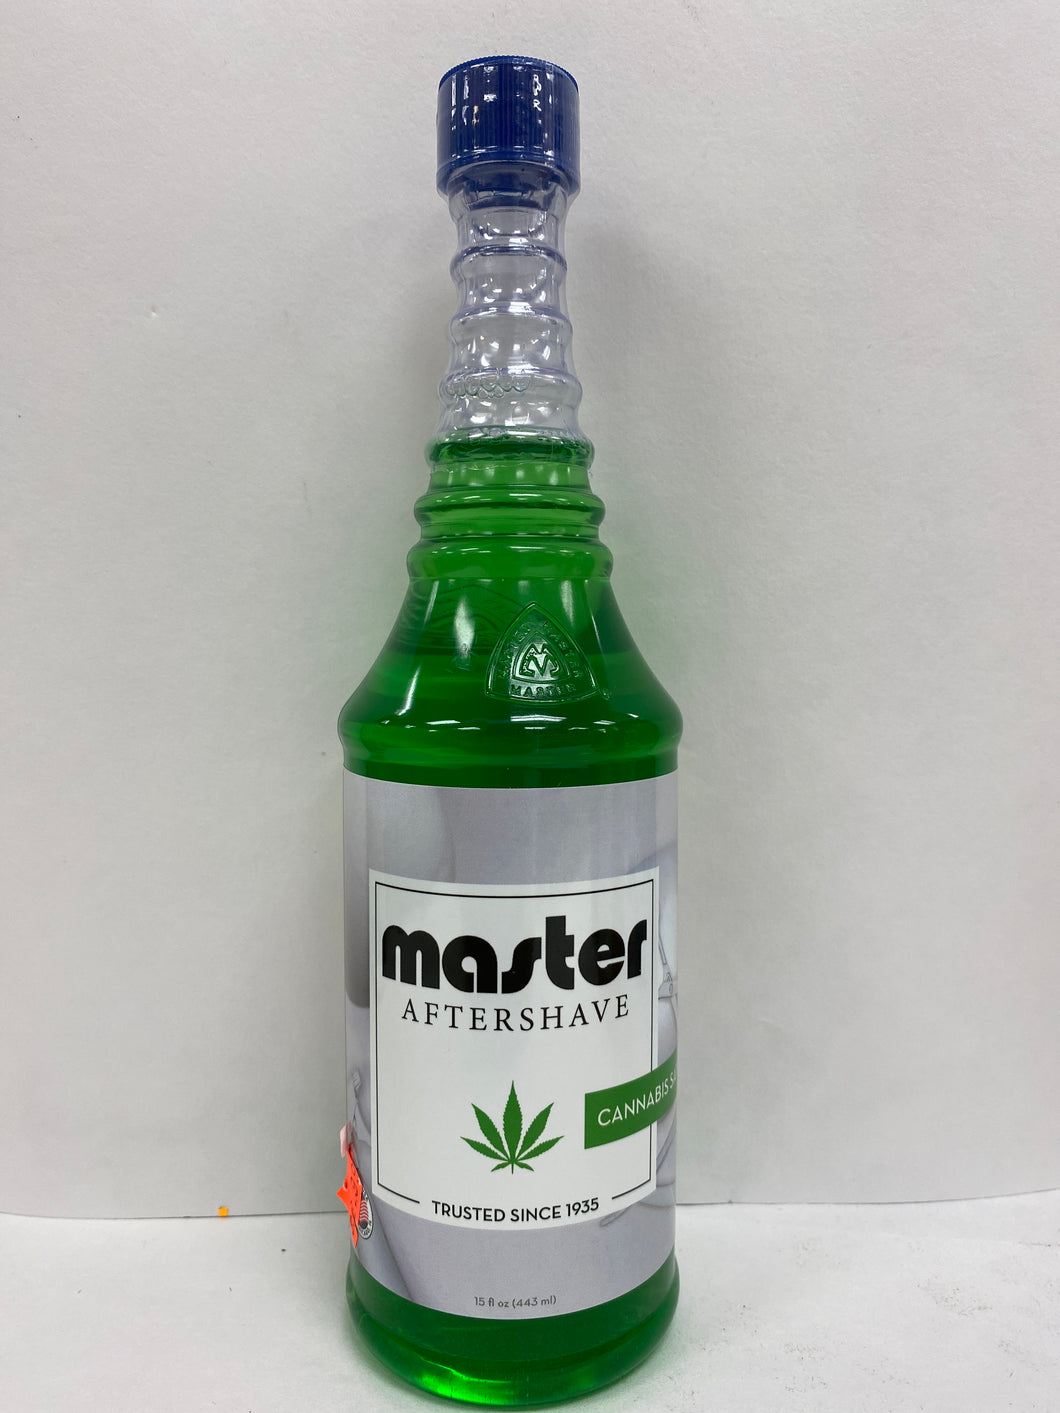 Master Aftershave Cannabis Sativa Oil